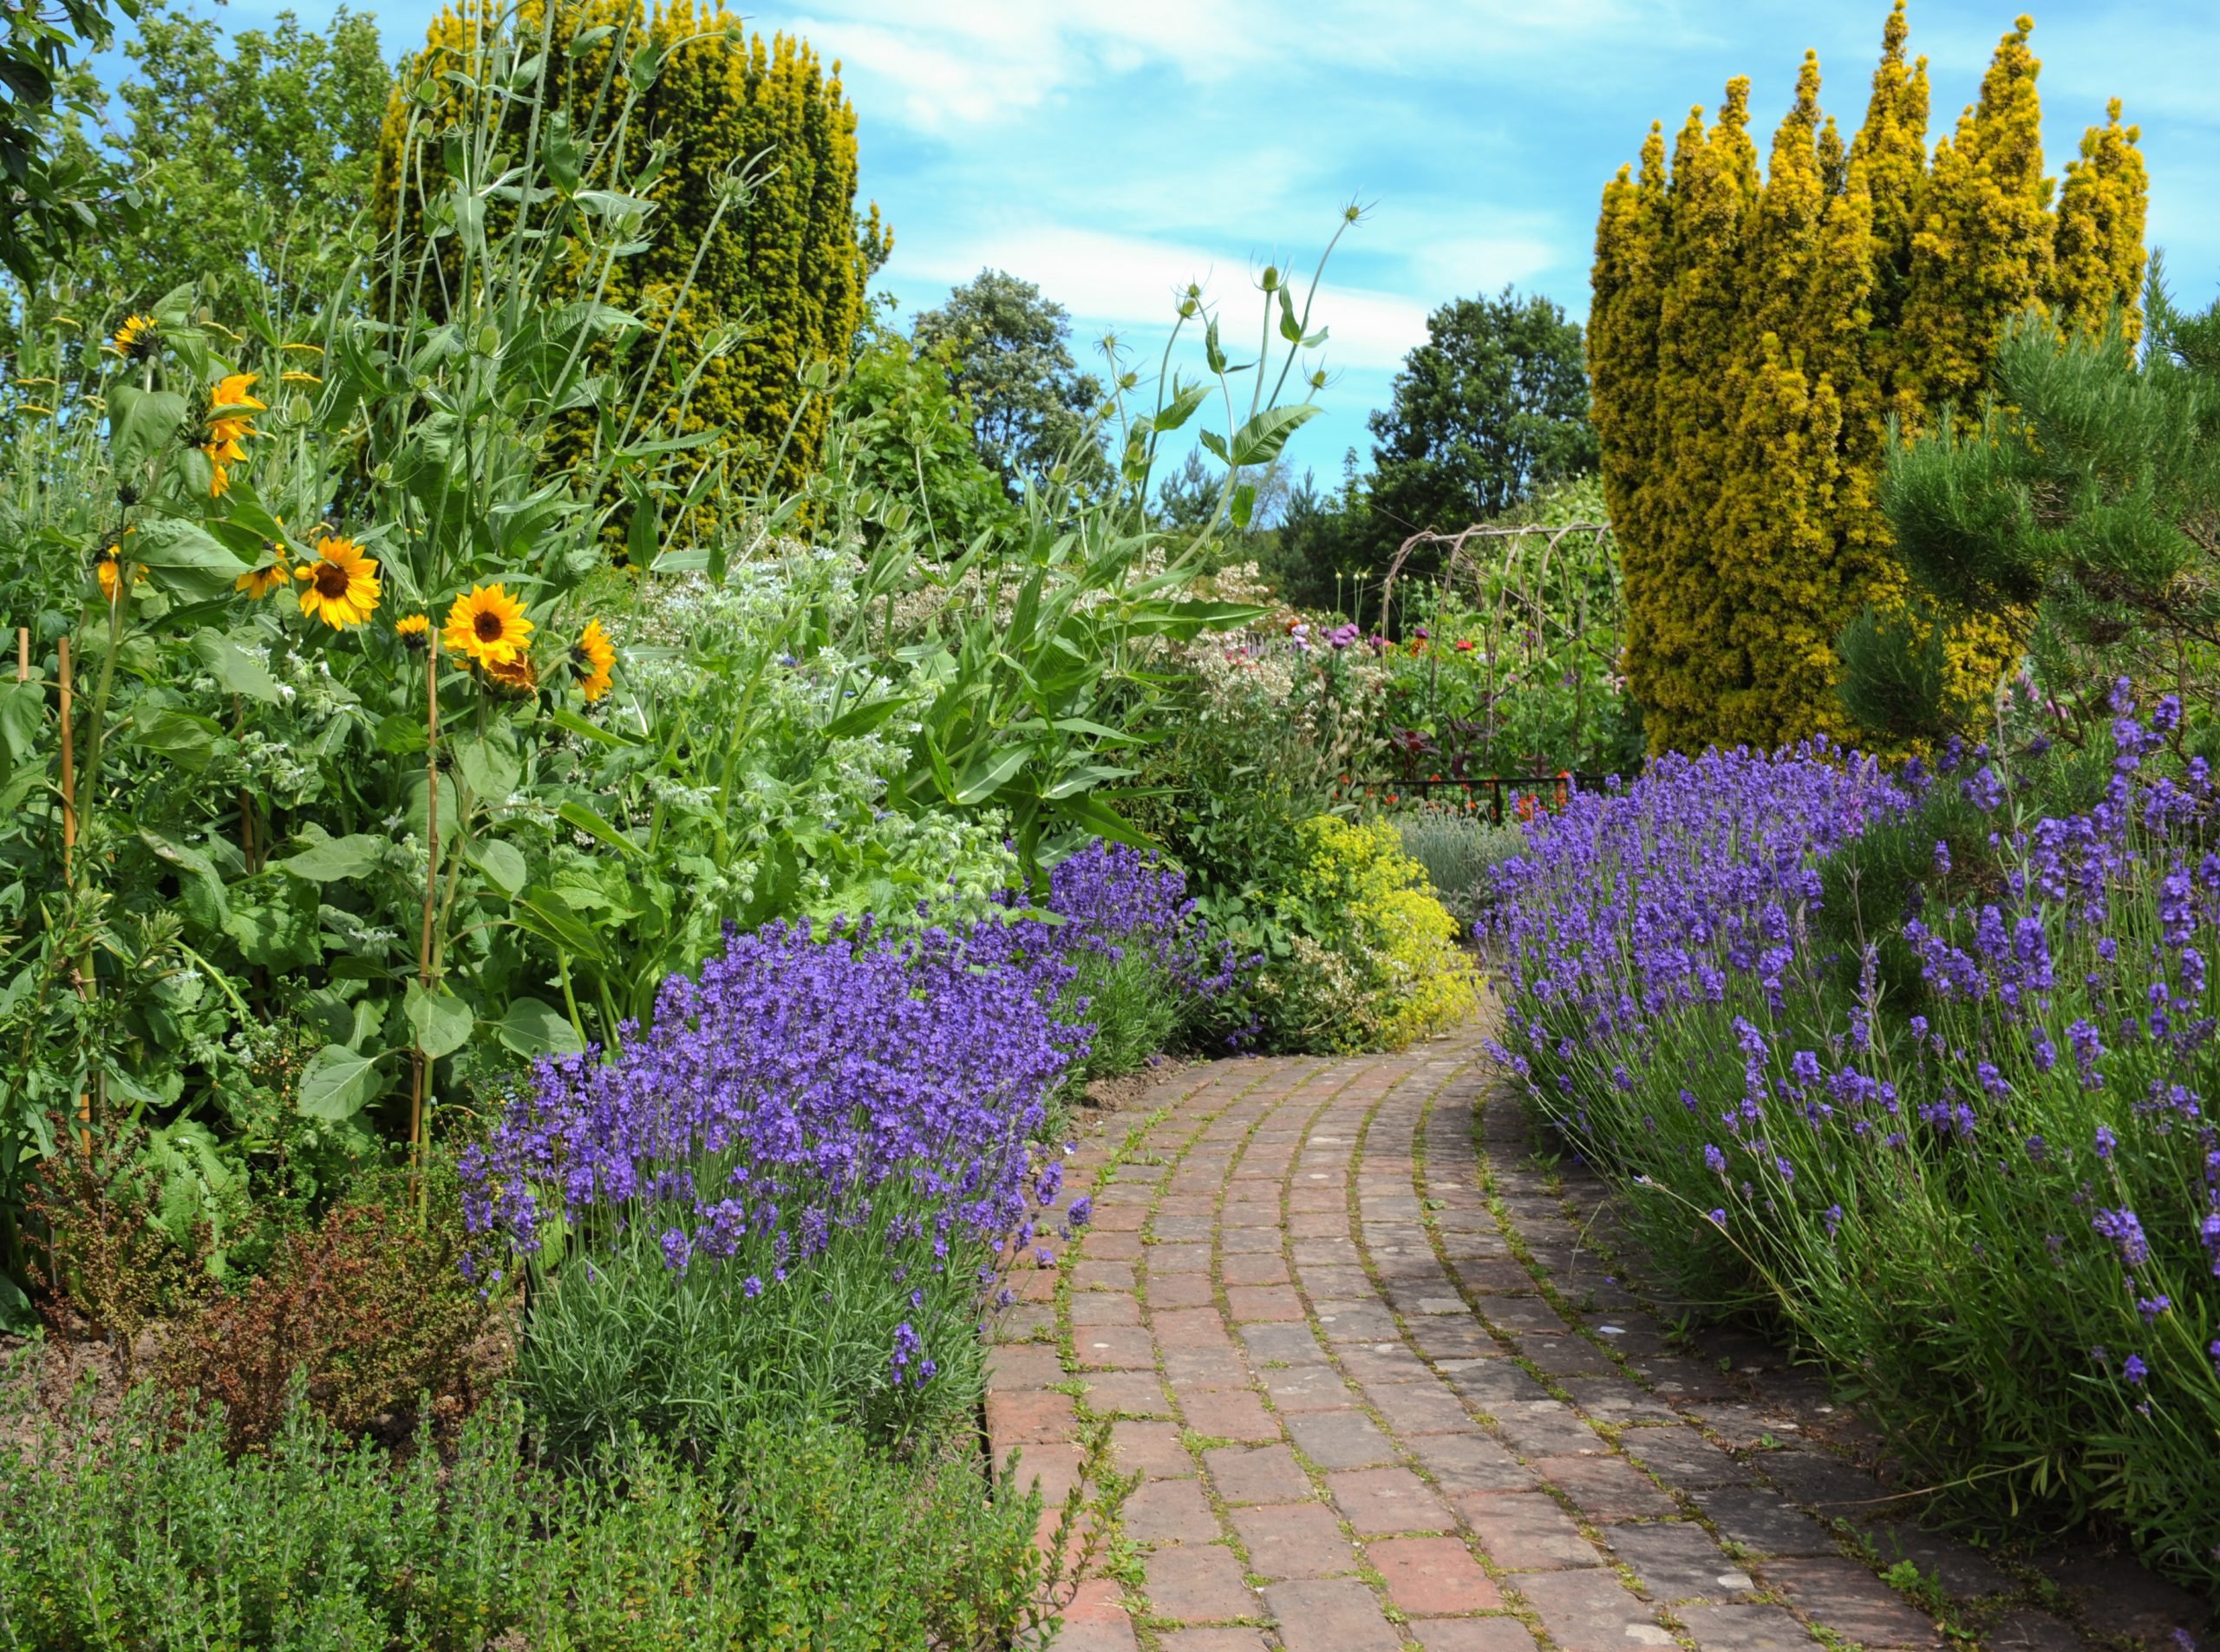 Lavender Bushes and Sunflowers Beside a Footpath